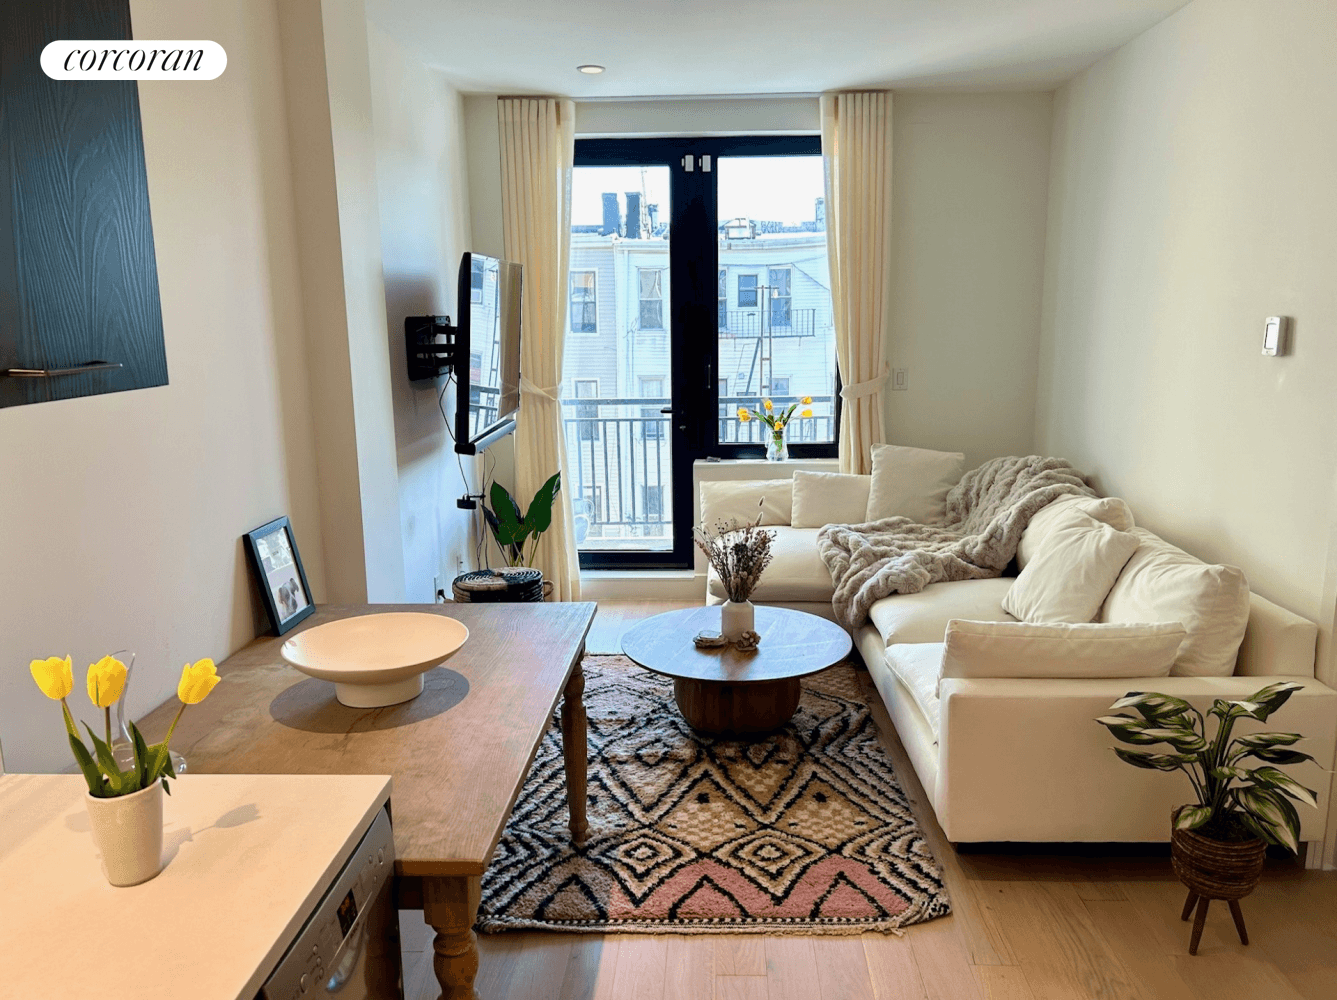 Introducing 738 Grand Street 4B, a stunning 1 bedroom, 1 bathroom residence located in the heart of vibrant Williamsburg, Brooklyn.